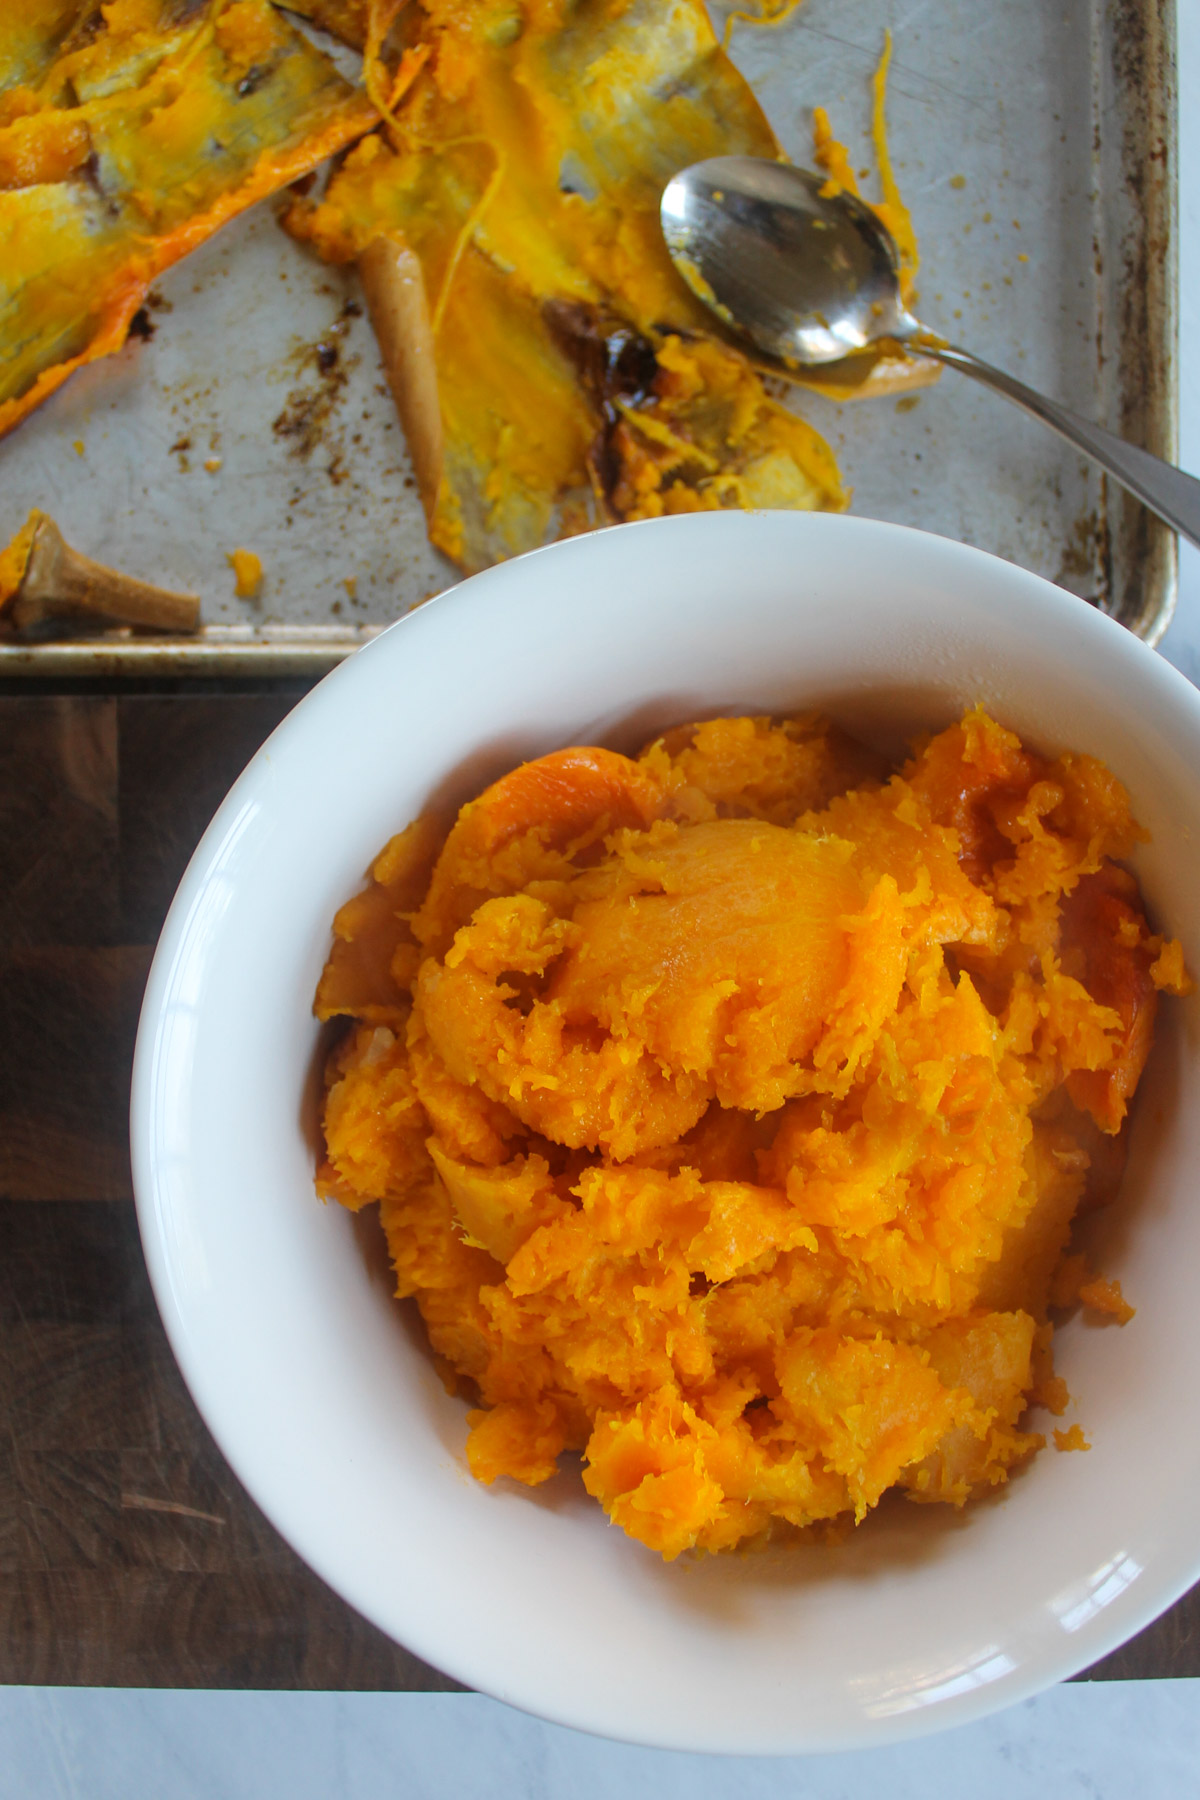 Roasted butternut squash scooped from the shell into a white bowl.